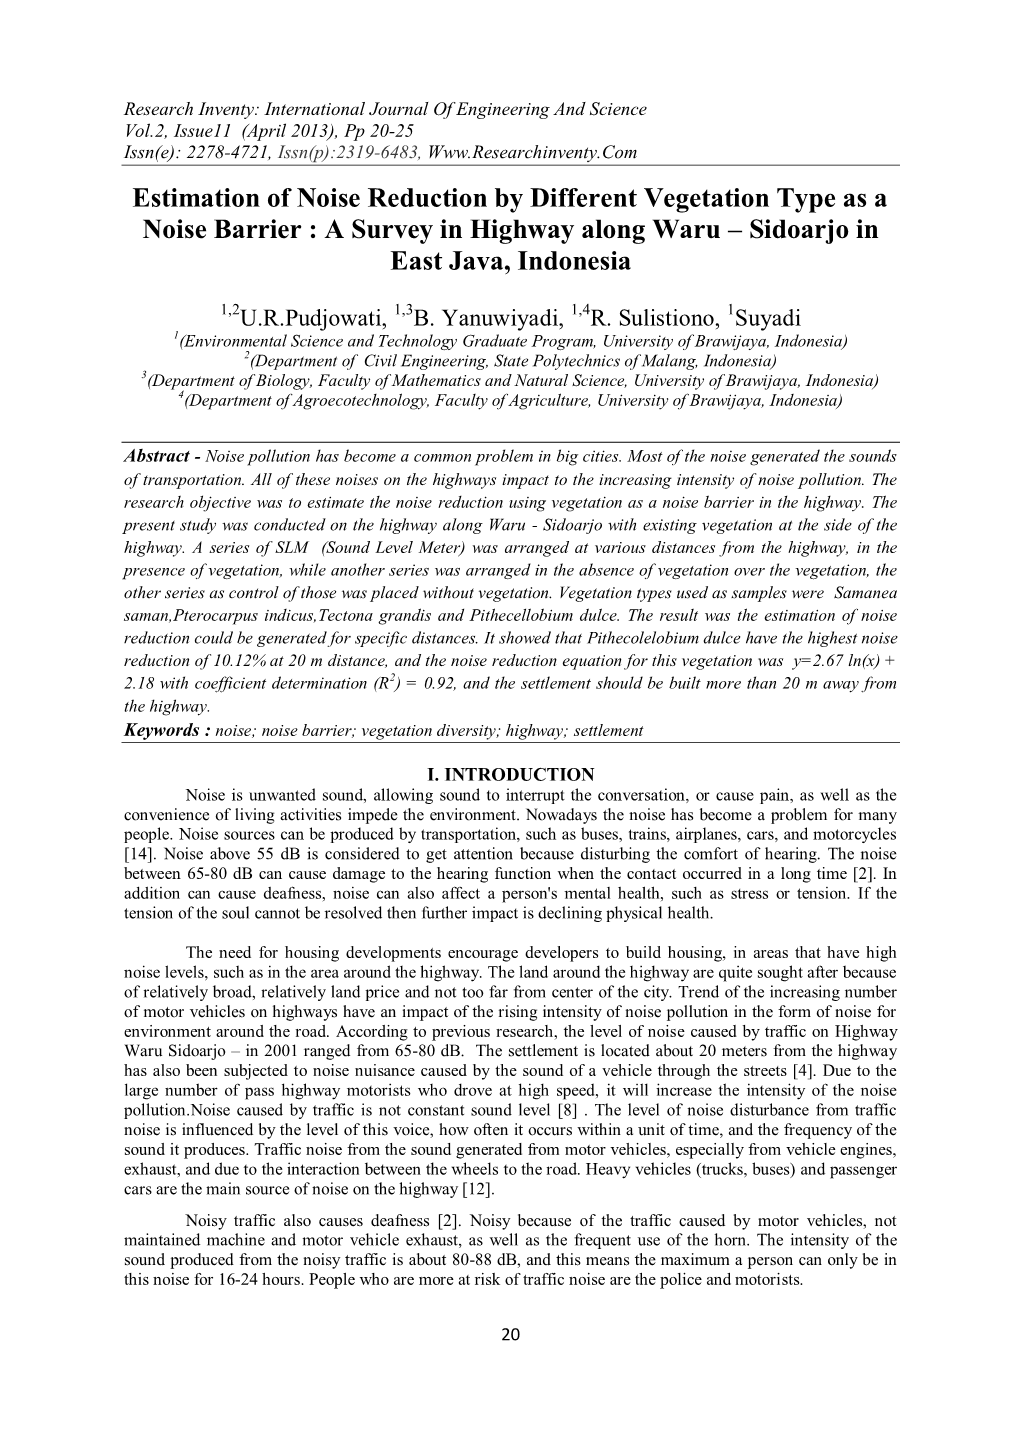 Estimation of Noise Reduction by Different Vegetation Type As a Noise Barrier : a Survey in Highway Along Waru – Sidoarjo in East Java, Indonesia